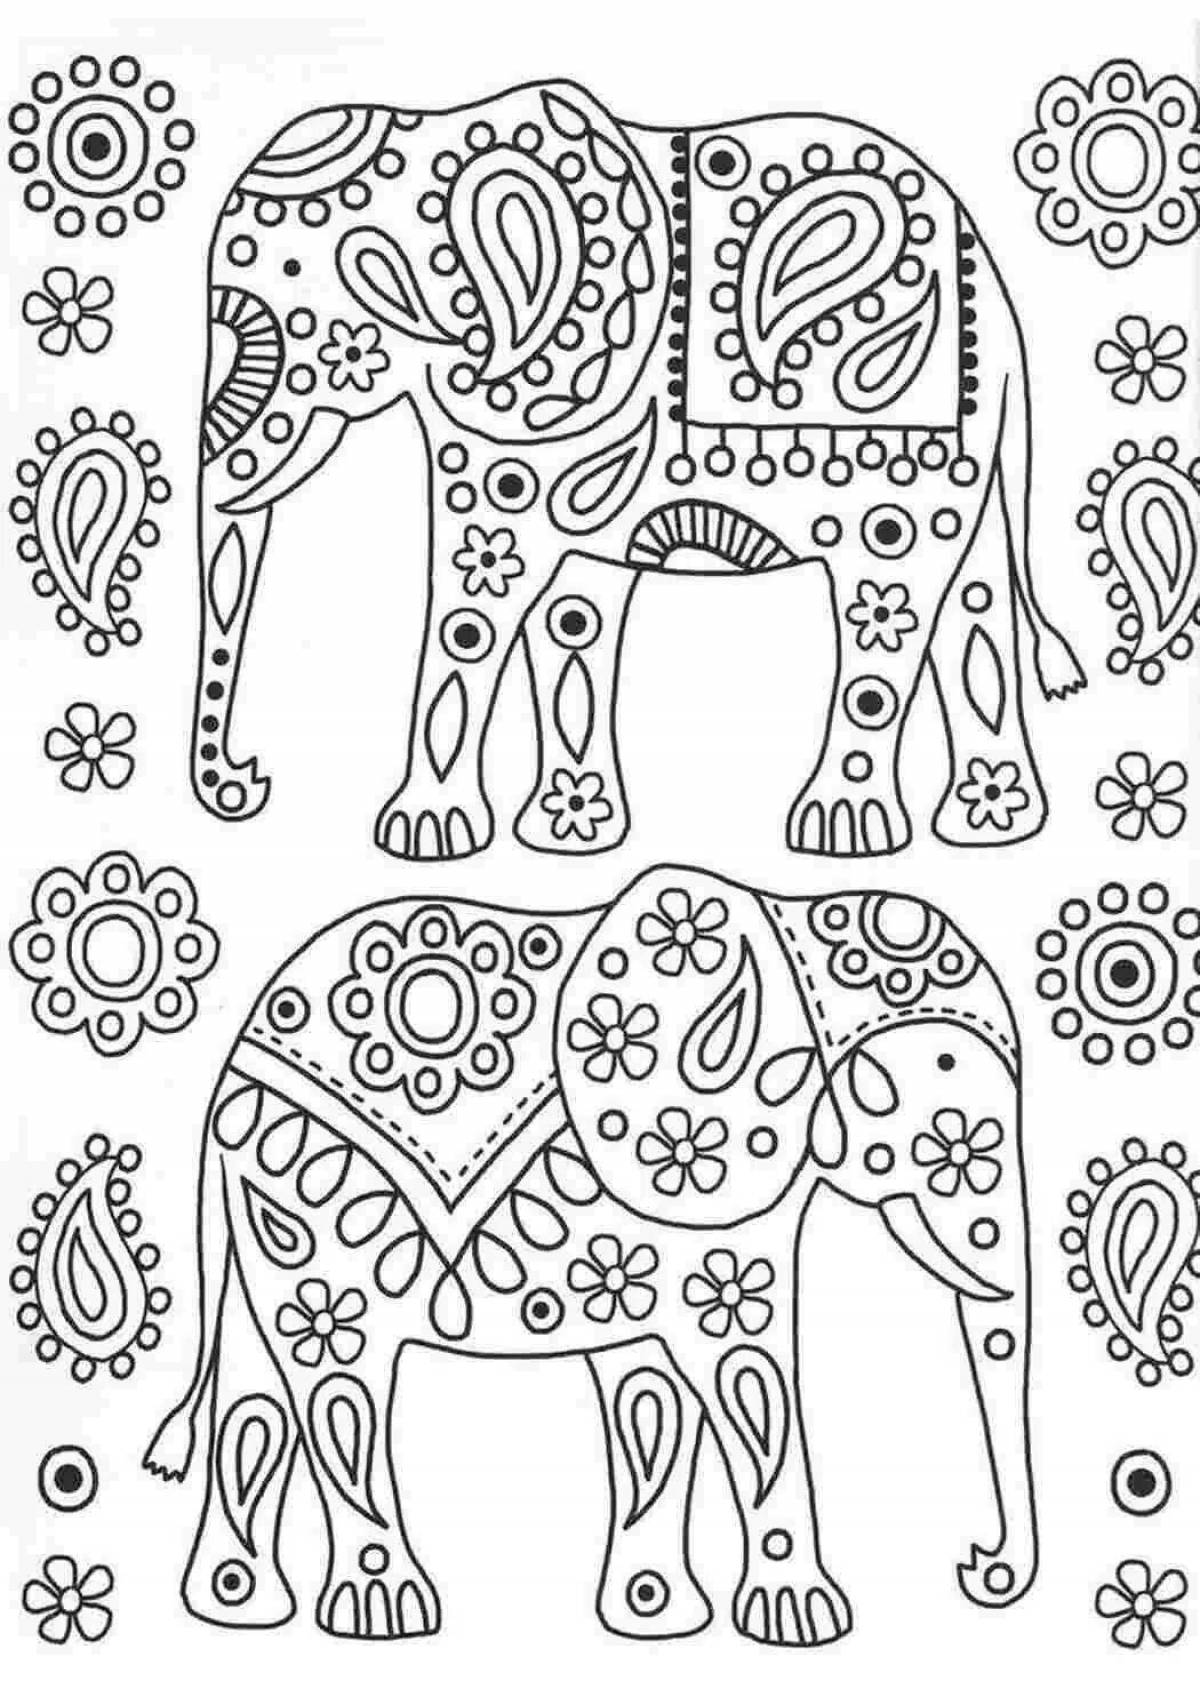 Charming anti-stress elephant coloring book